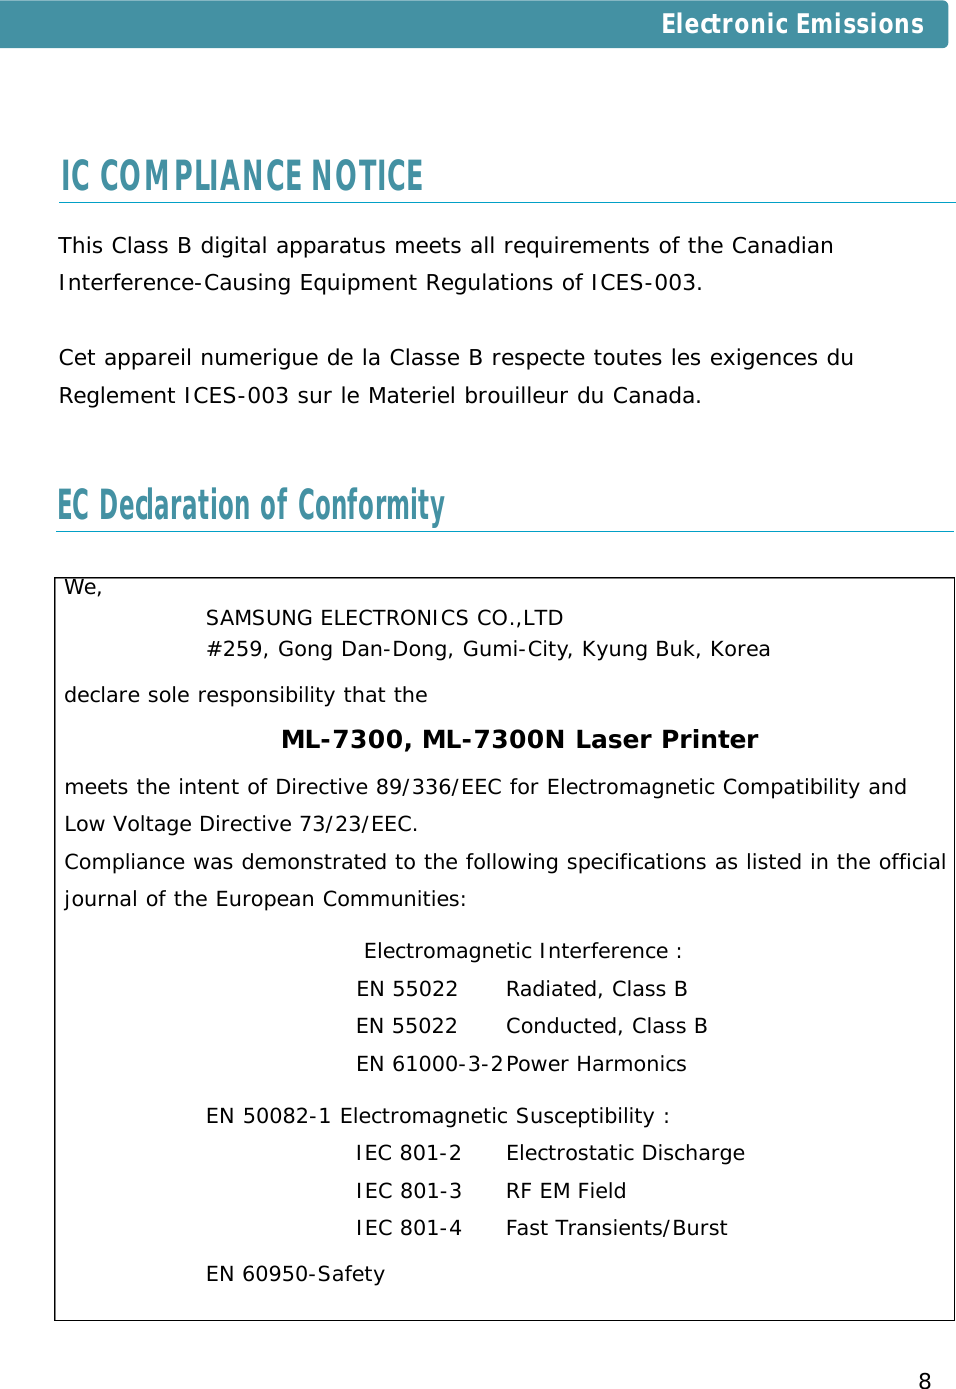 8We, SAMSUNG ELECTRONICS CO.,LTD#259, Gong Dan-Dong, Gumi-City, Kyung Buk, Koreadeclare sole responsibility that the ML-7300, ML-7300N Laser Printermeets the intent of Directive 89/336/EEC for Electromagnetic Compatibility and Low Voltage Directive 73/23/EEC.Compliance was demonstrated to the following specifications as listed in the official journal of the European Communities:Electromagnetic Interference :EN 55022  Radiated, Class BEN 55022 Conducted, Class BEN 61000-3-2Power HarmonicsEN 50082-1 Electromagnetic Susceptibility :IEC 801-2 Electrostatic DischargeIEC 801-3 RF EM FieldIEC 801-4 Fast Transients/BurstEN 60950-SafetyEC Declaration of ConformityThis Class B digital apparatus meets all requirements of the CanadianInterference-Causing Equipment Regulations of ICES-003.Cet appareil numerigue de la Classe B respecte toutes les exigences duReglement ICES-003 sur le Materiel brouilleur du Canada.IC COMPLIANCE NOTICEElectronic Emissions